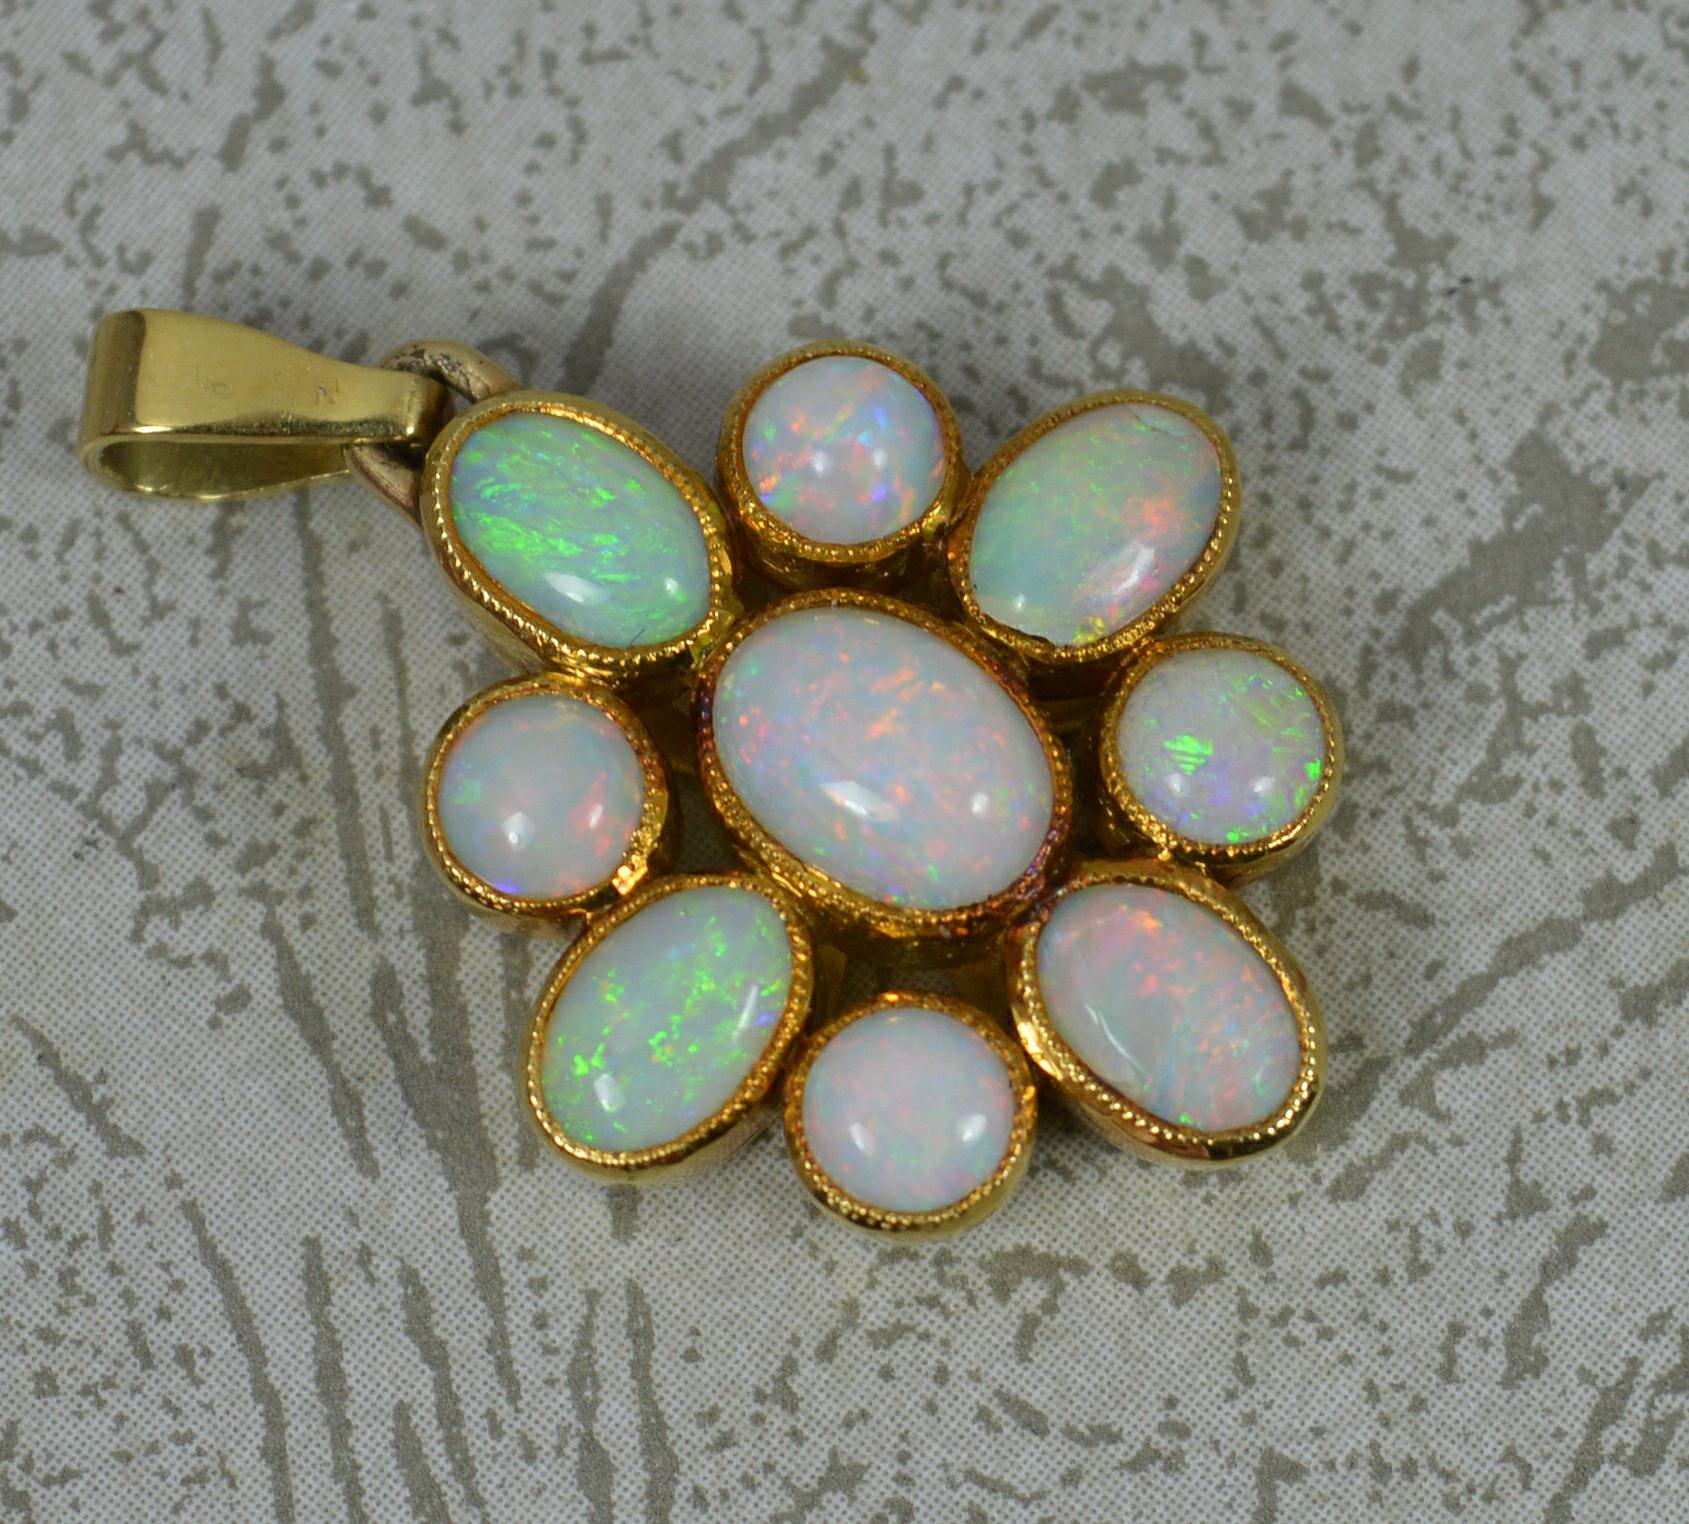 Women's Beautiful 14 Carat Gold and Colourful Natural Opal Pendant